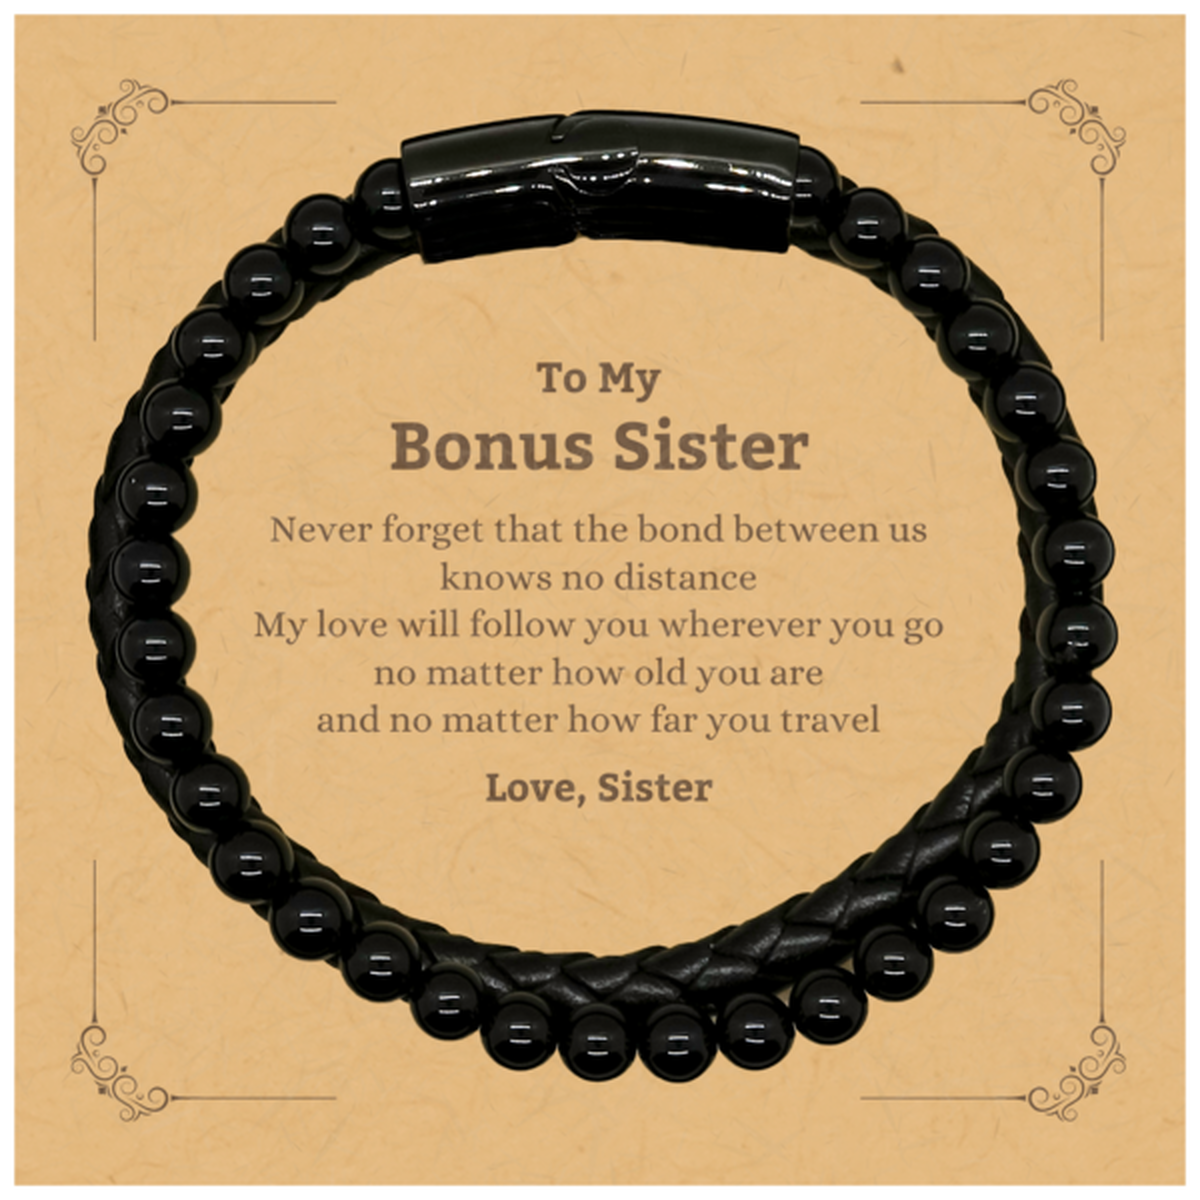 Bonus Sister Birthday Gifts from Sister, Adjustable Stone Leather Bracelets for Bonus Sister Christmas Graduation Unique Gifts Bonus Sister Never forget that the bond between us knows no distance. Love, Sister